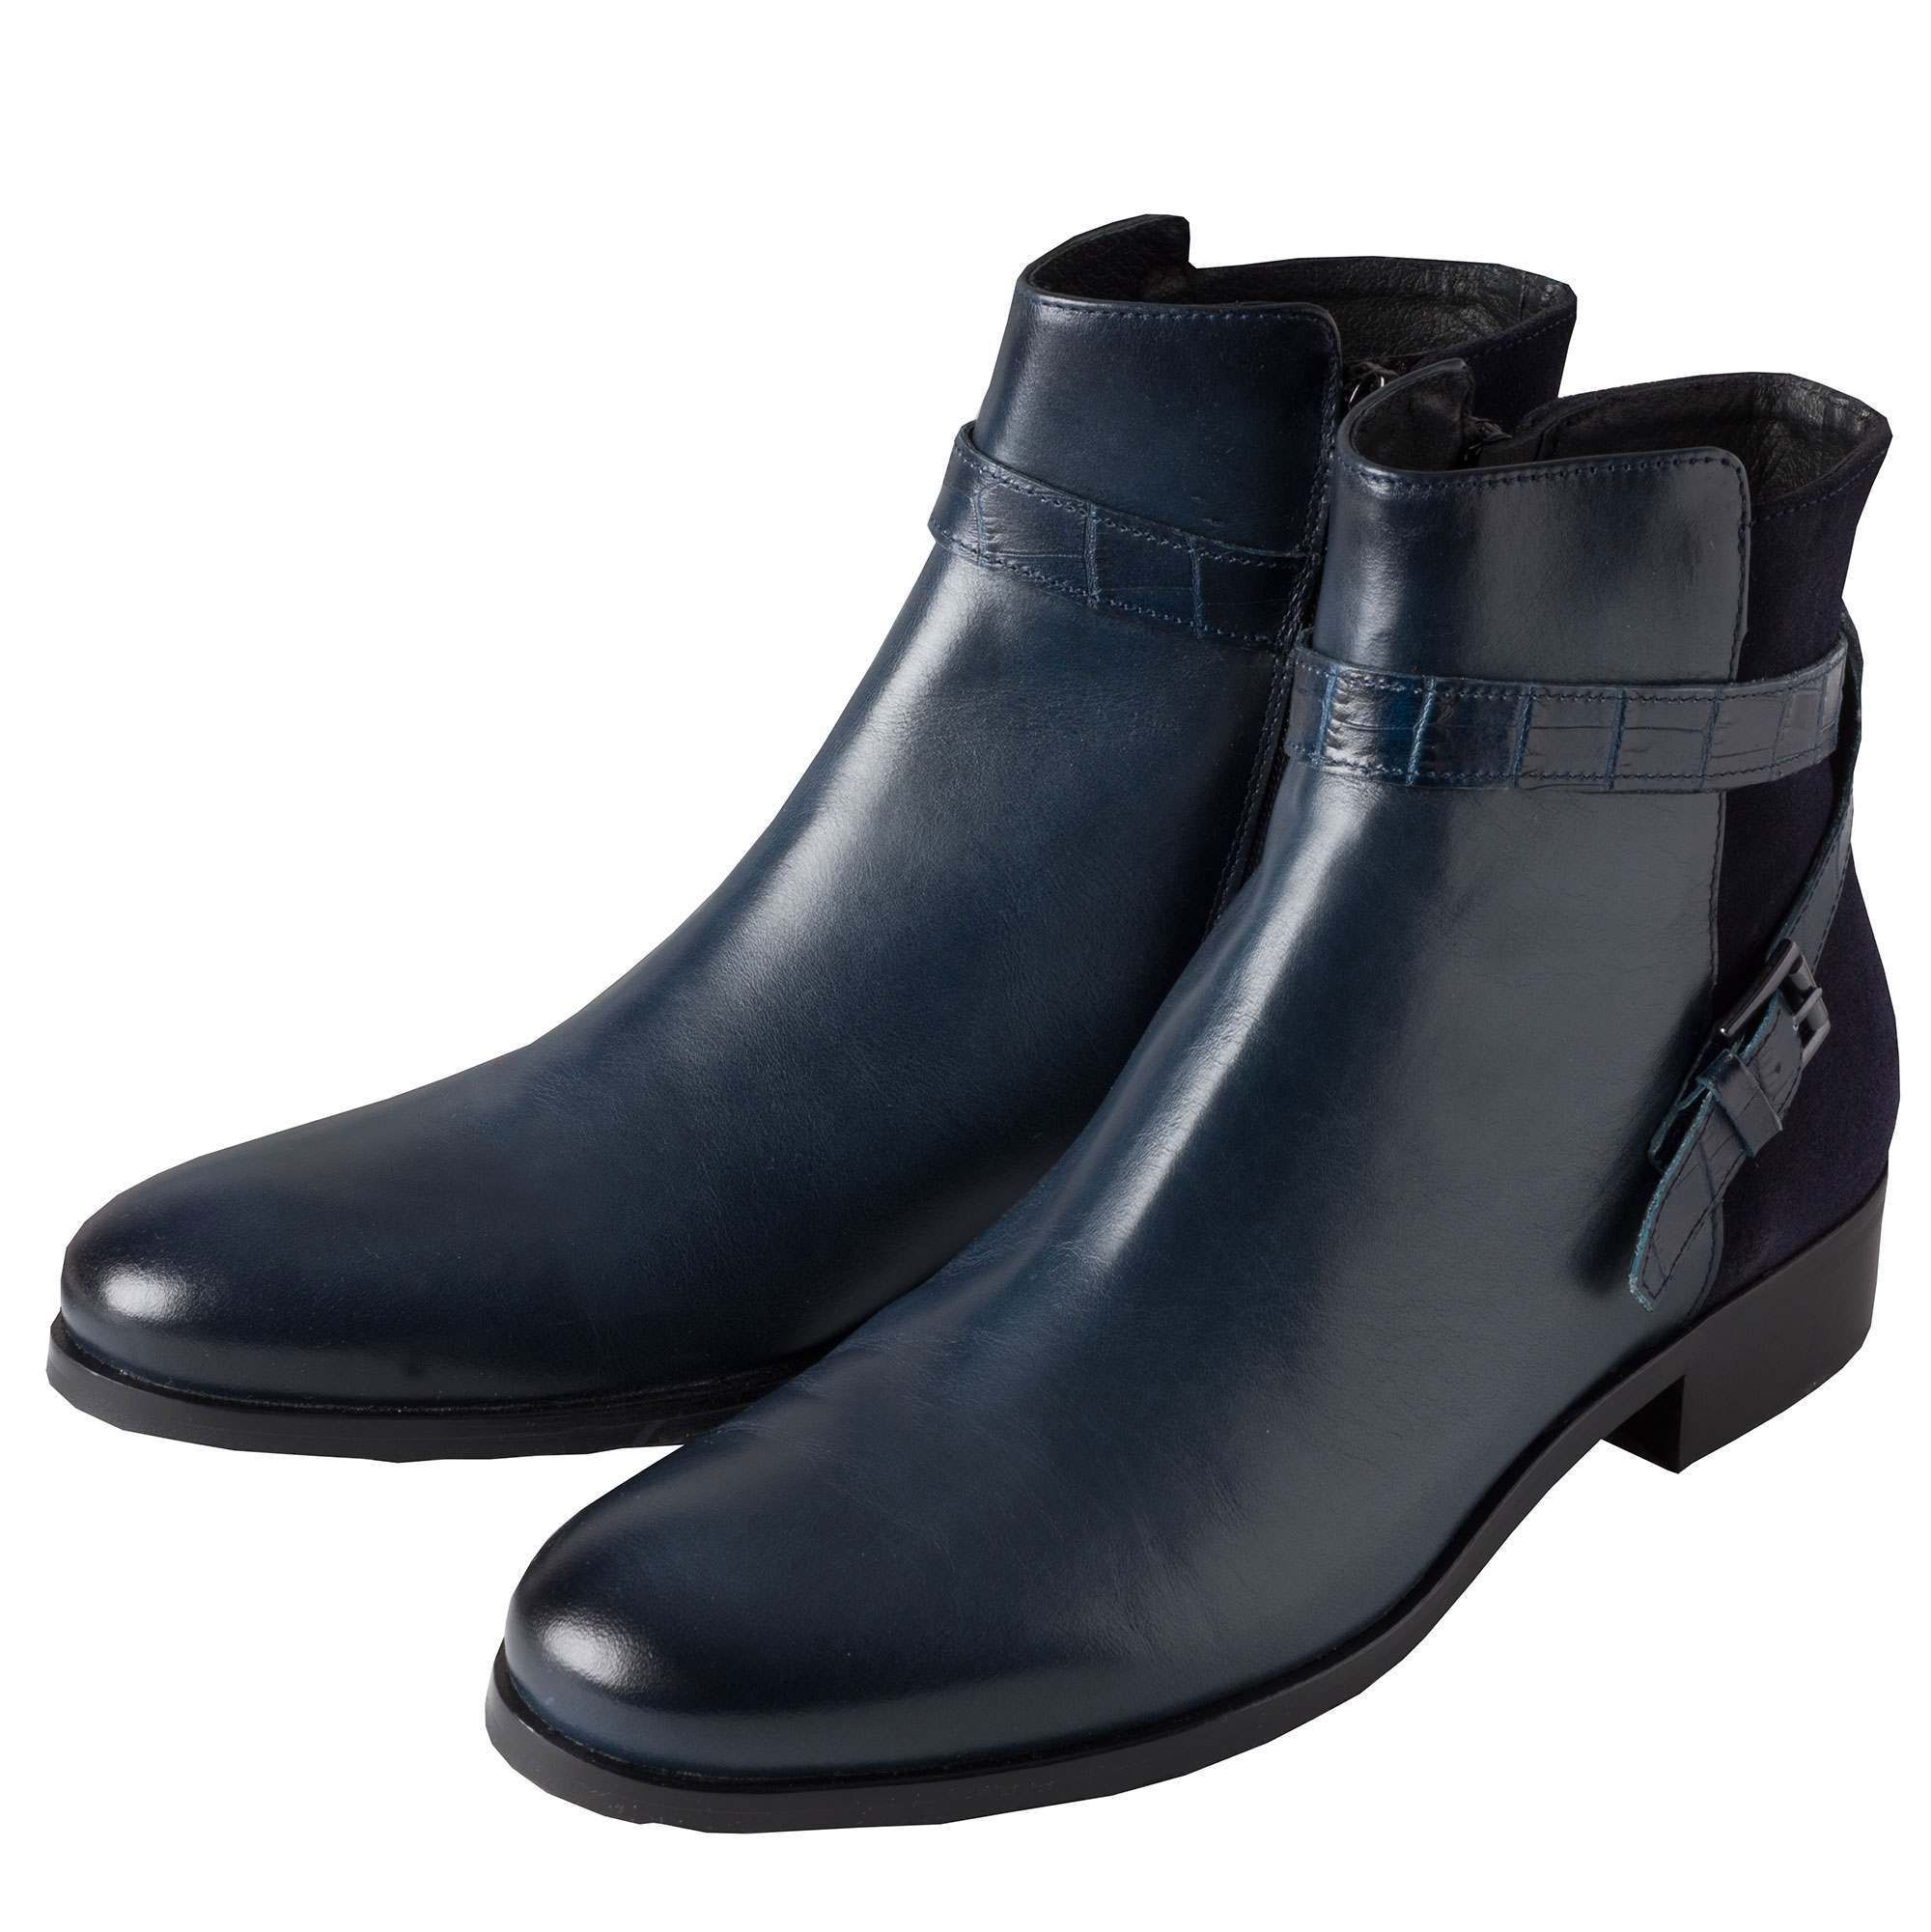 navy leather ankle boots uk online 